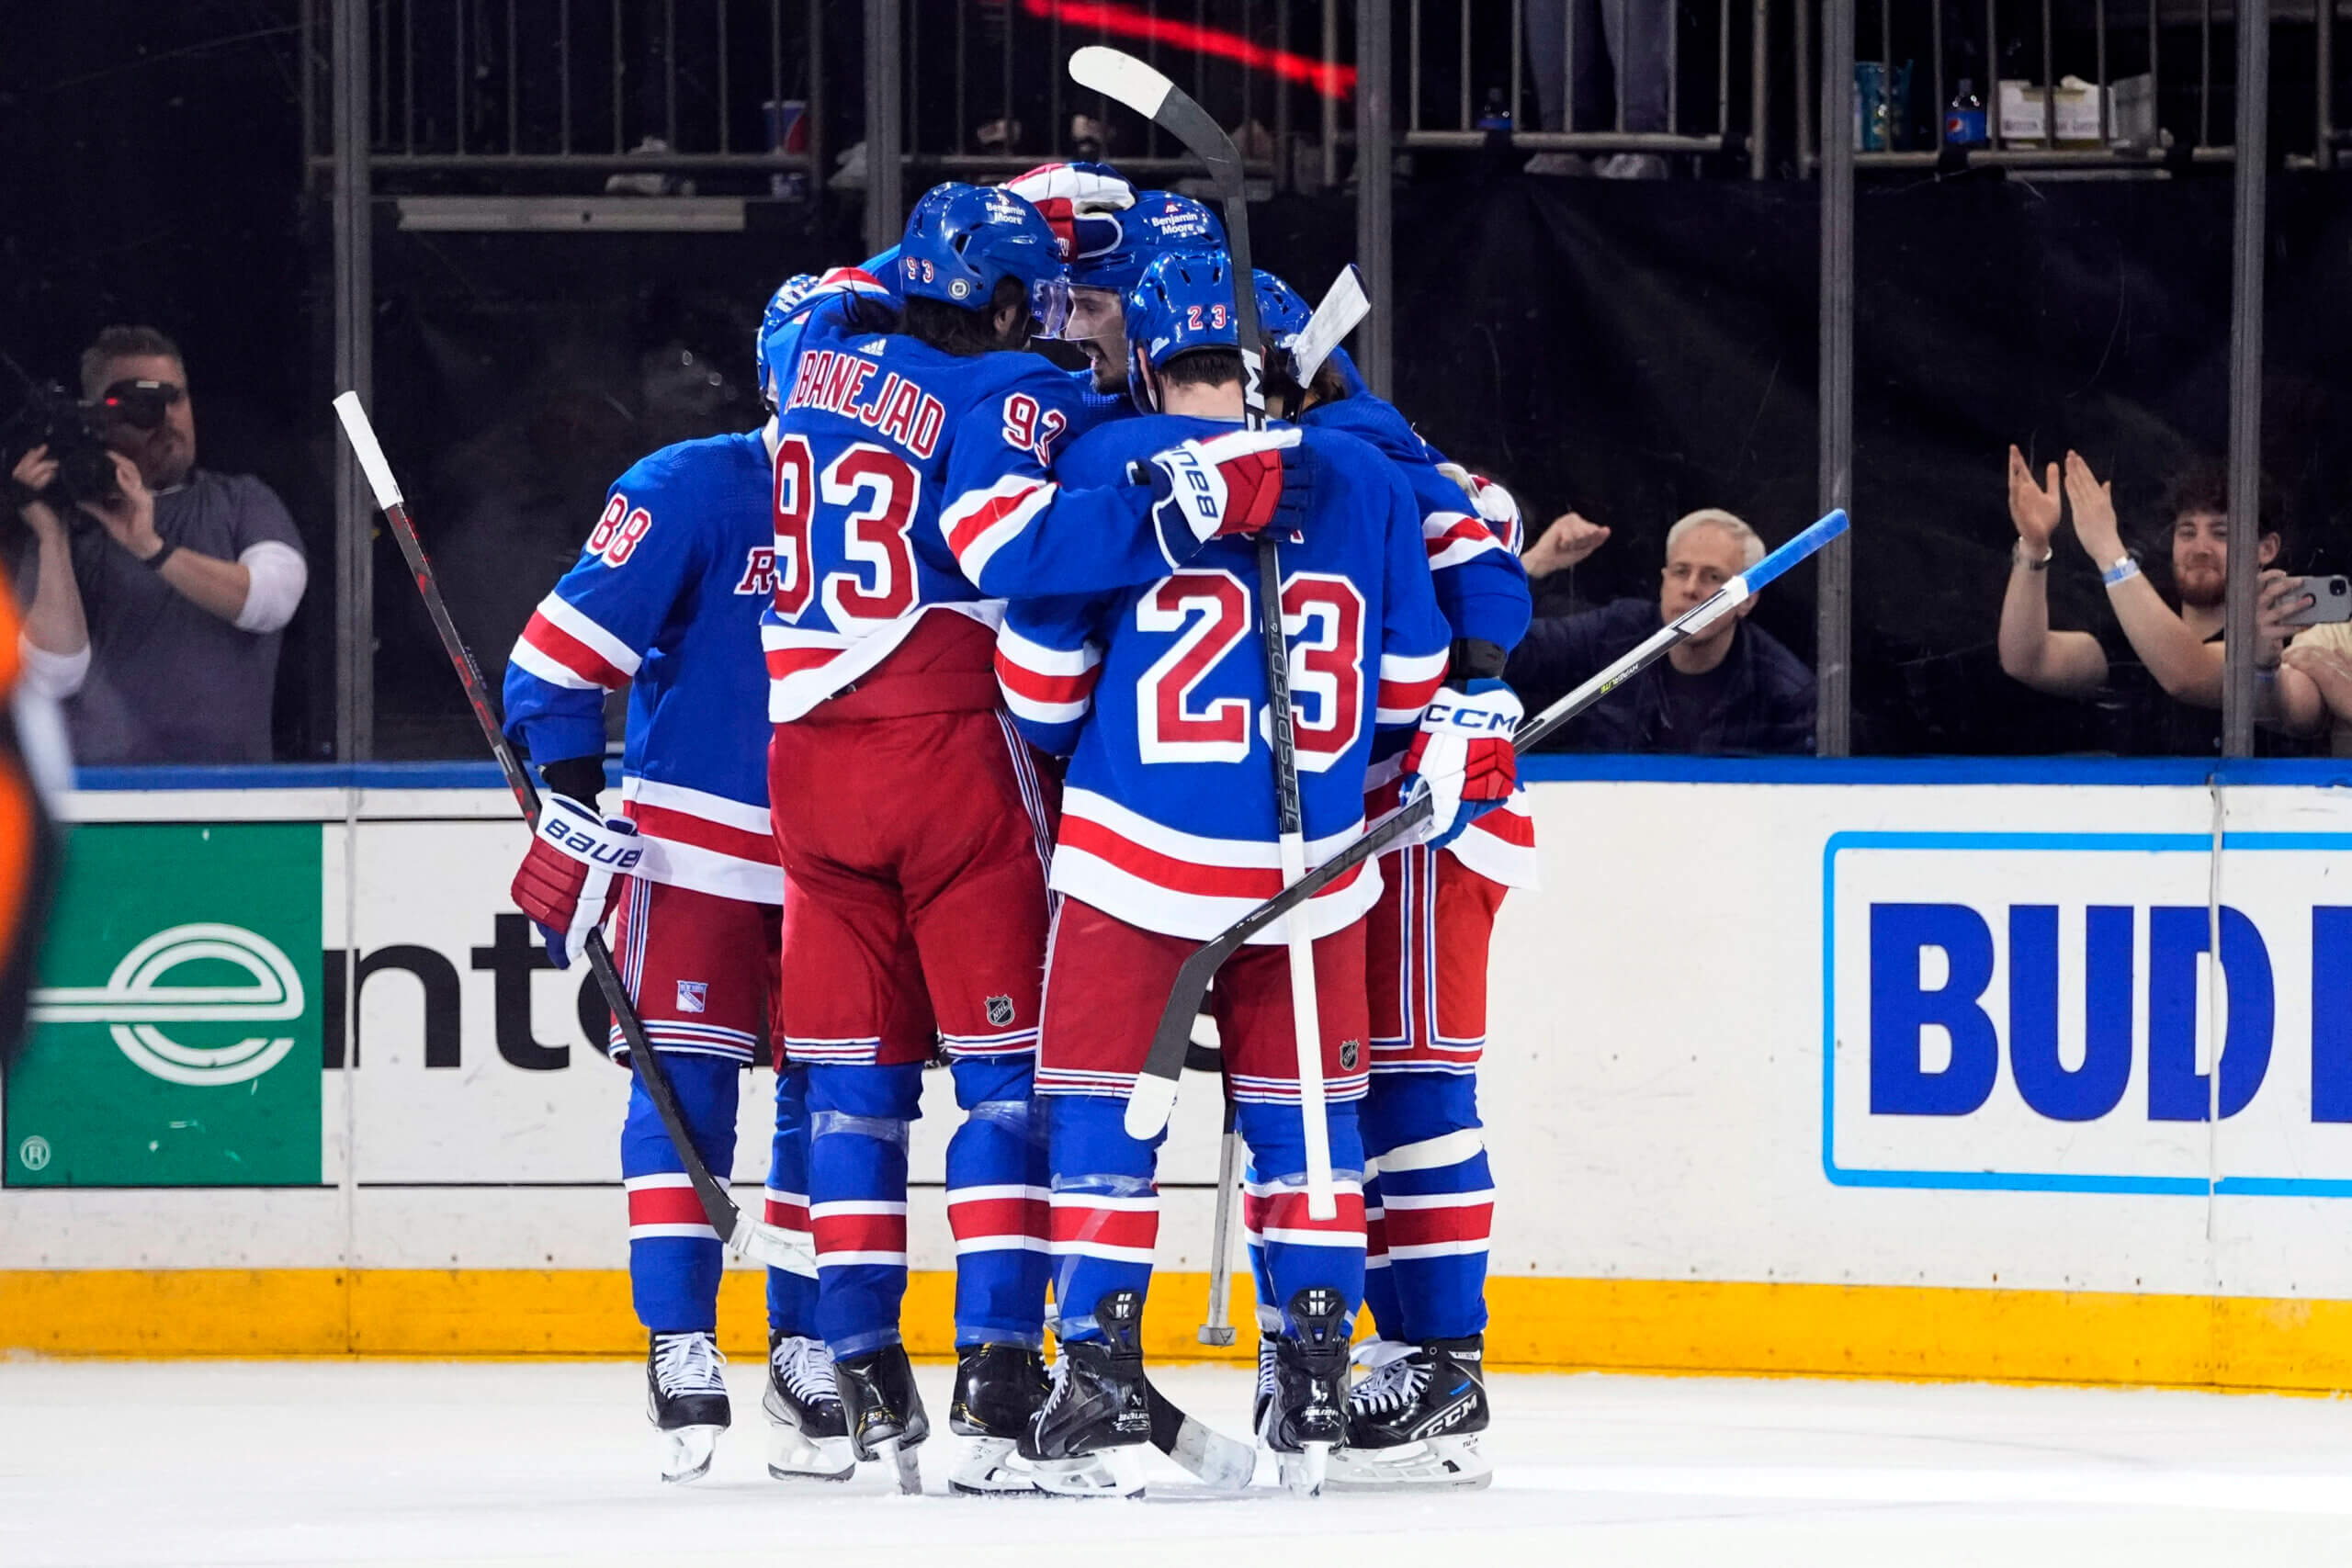 Devils/Rangers Rivalry Will Be Must-Watch This Season